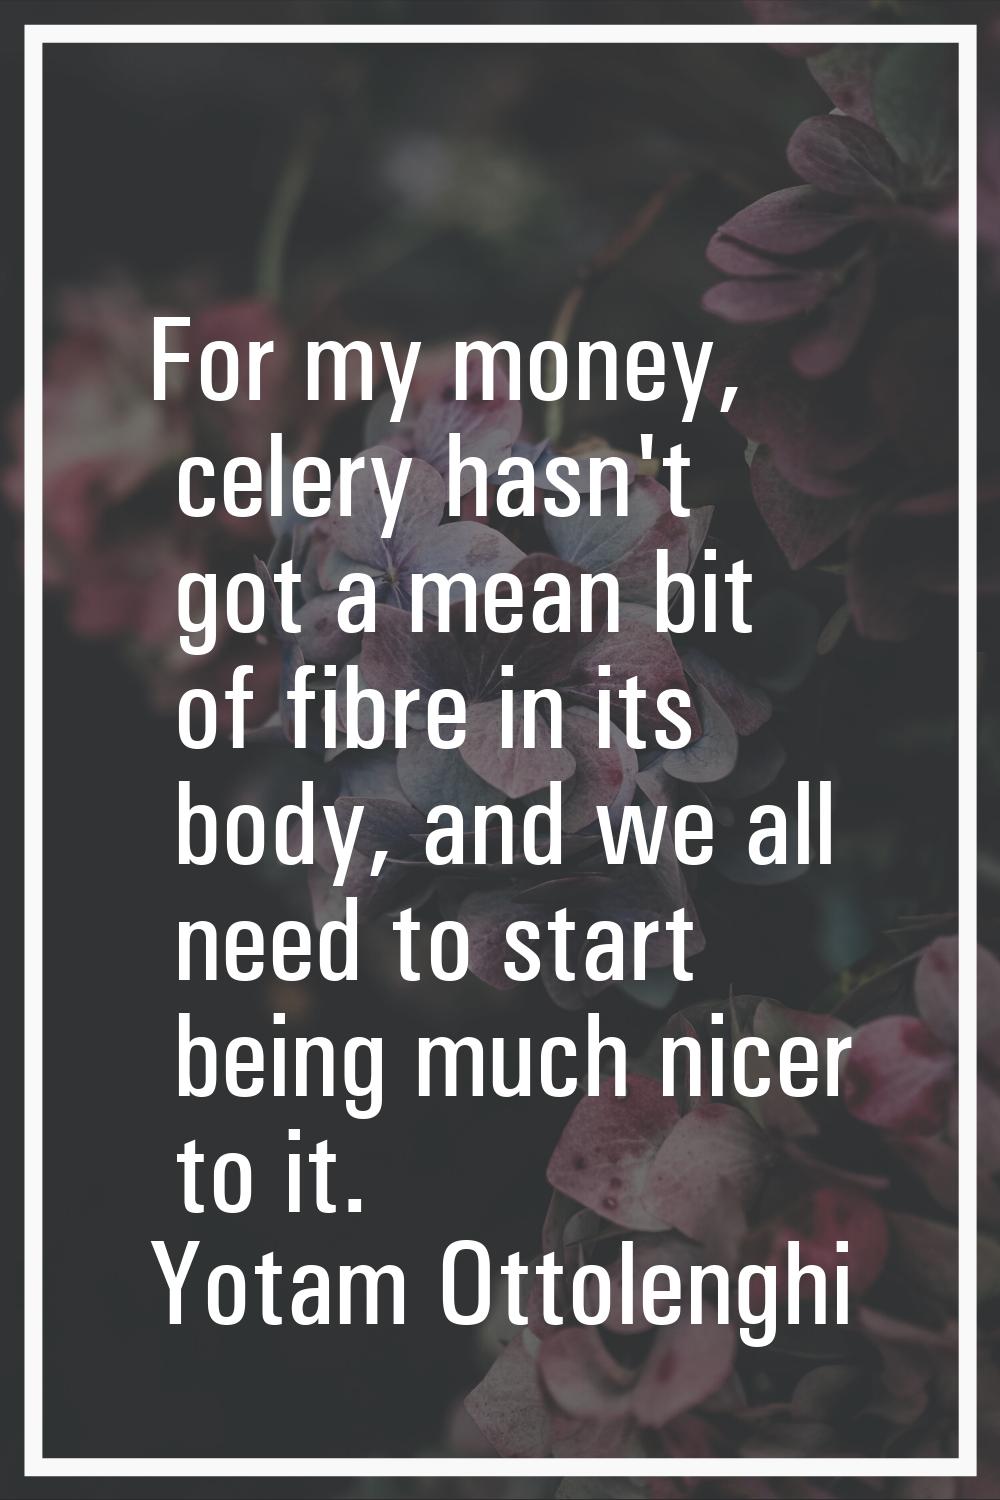 For my money, celery hasn't got a mean bit of fibre in its body, and we all need to start being muc